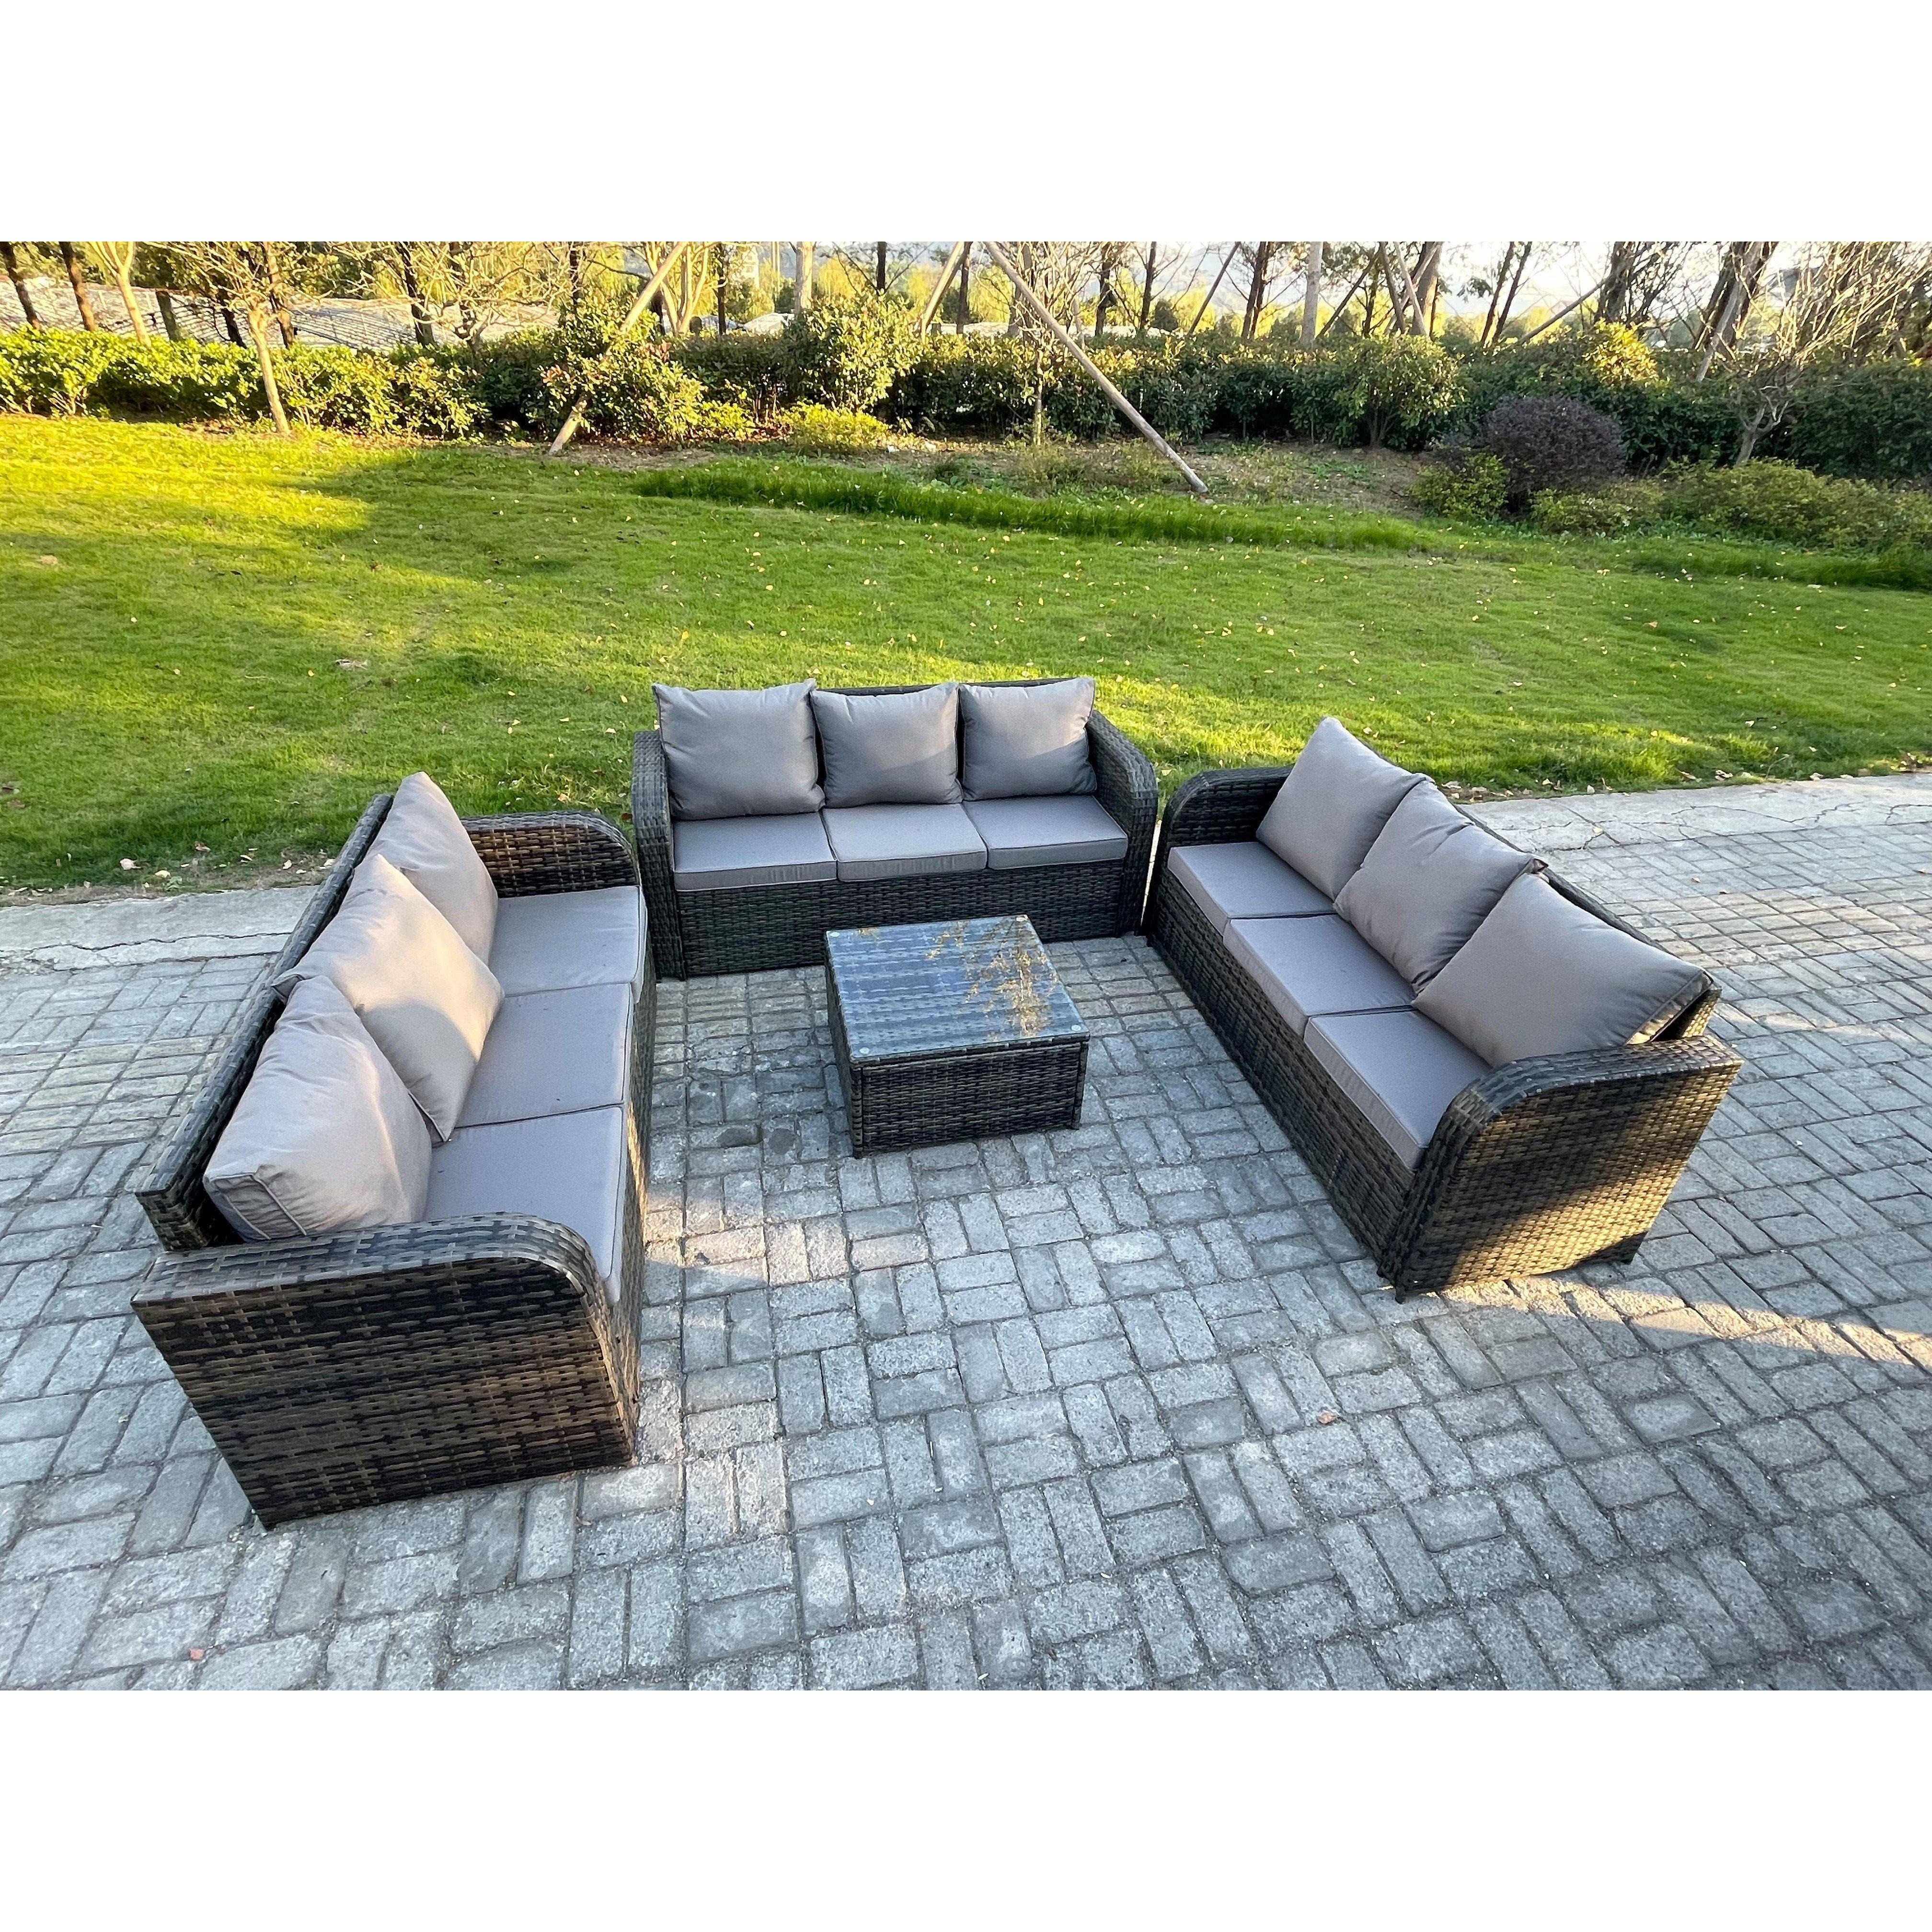 Patio Garden Furniture Sets Wicker 9 Seater Outdoor Rattan Furniture Sofa Sets with Square Coffee Table - image 1